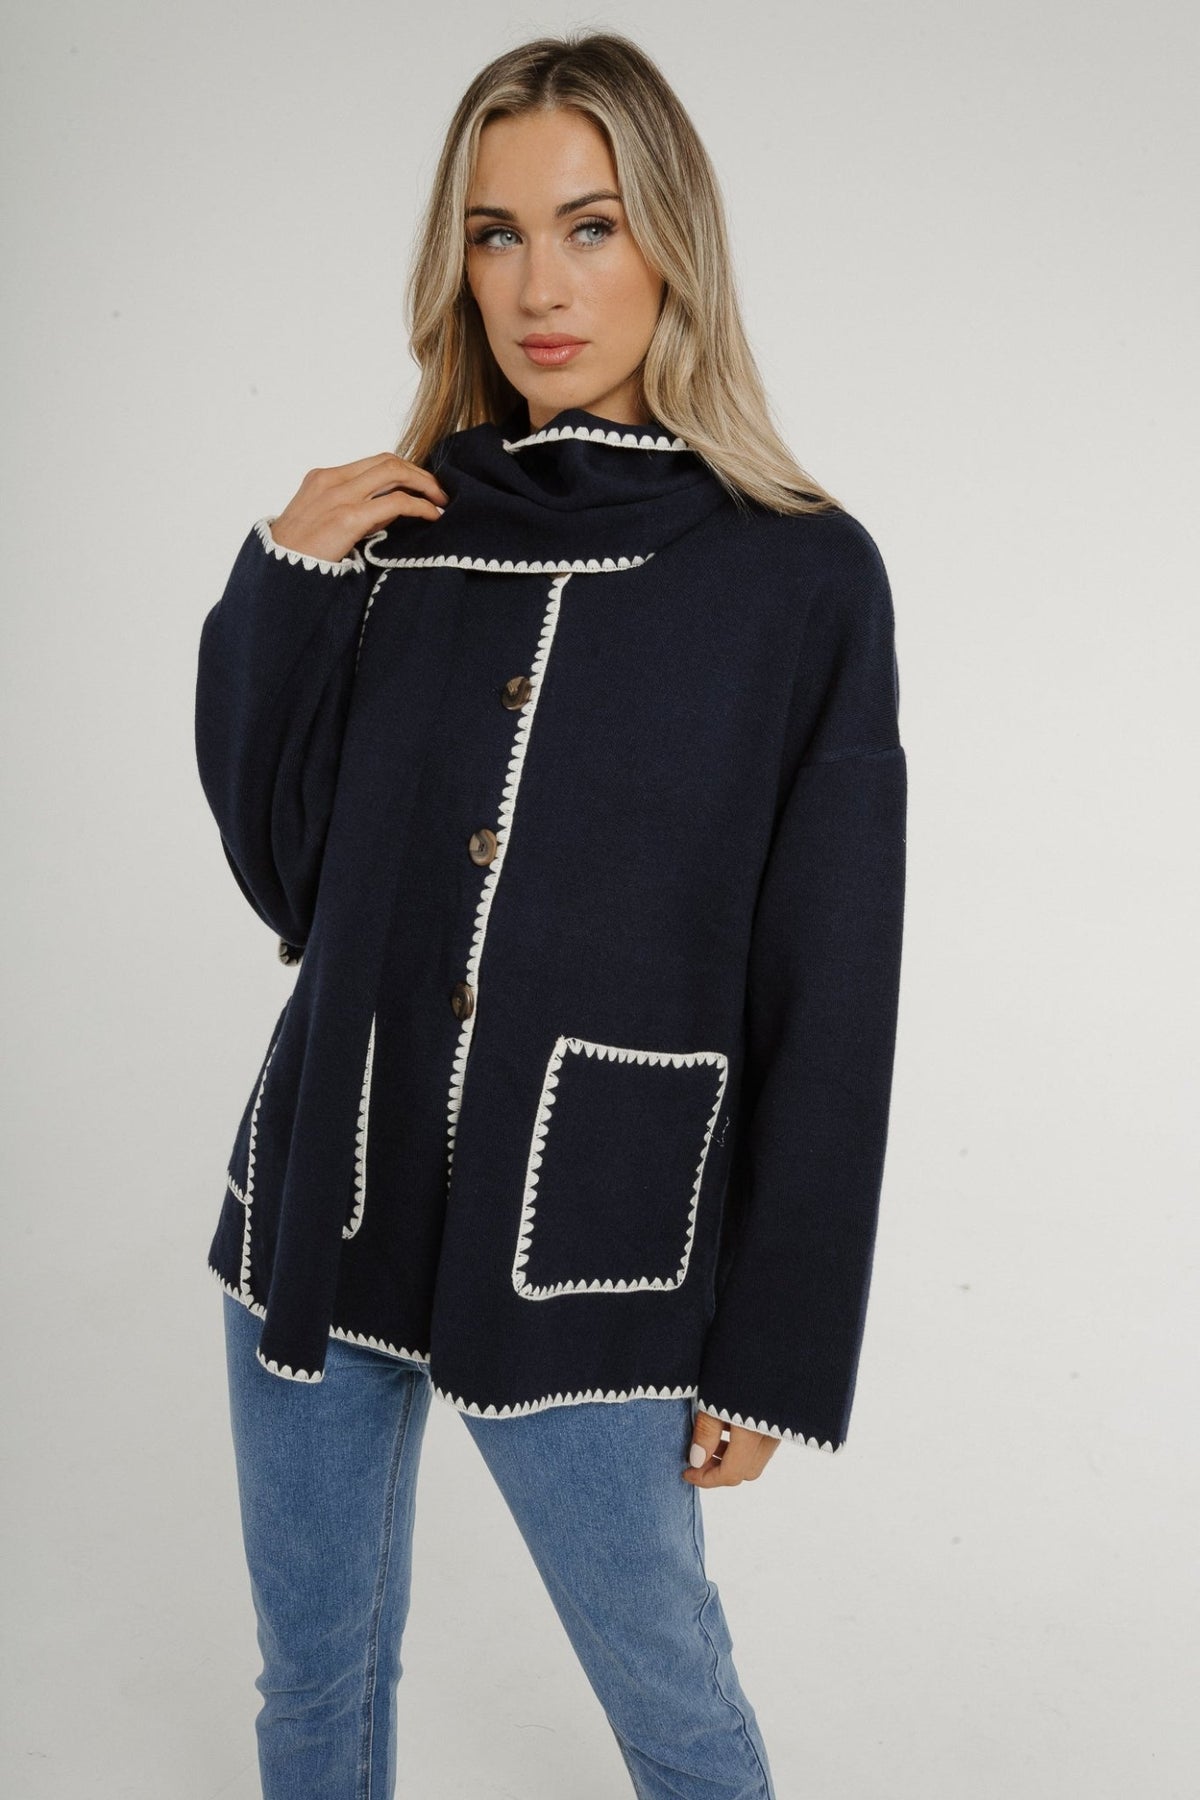 Ally Jacket & Scarf With Trim In Navy - The Walk in Wardrobe